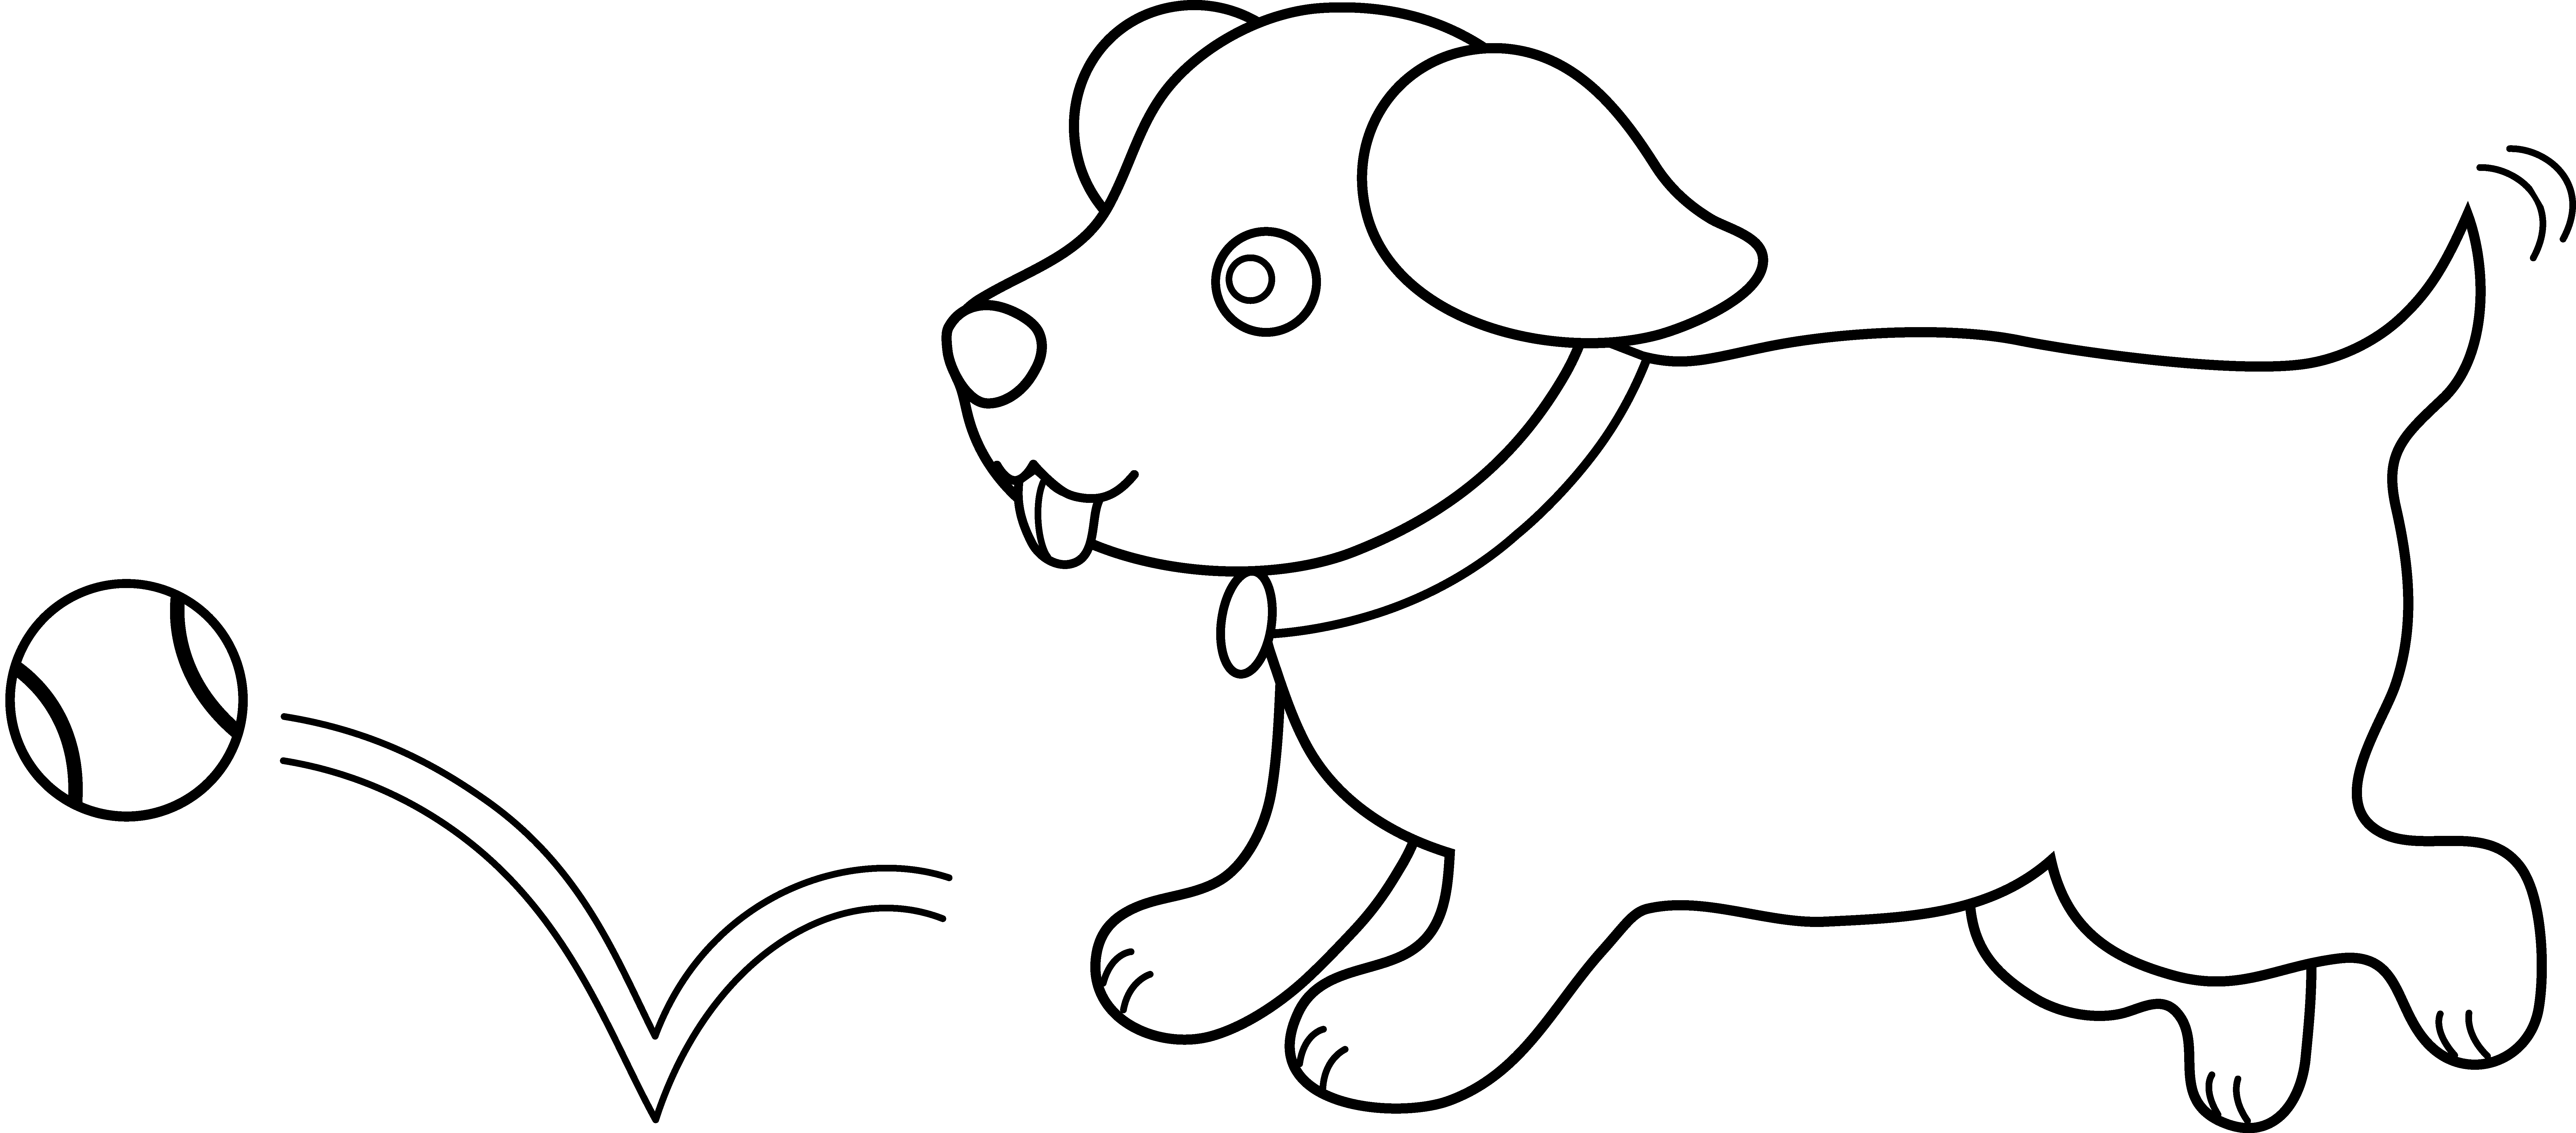 Line Art Of Puppy Playing Fetch - Free Clip Art